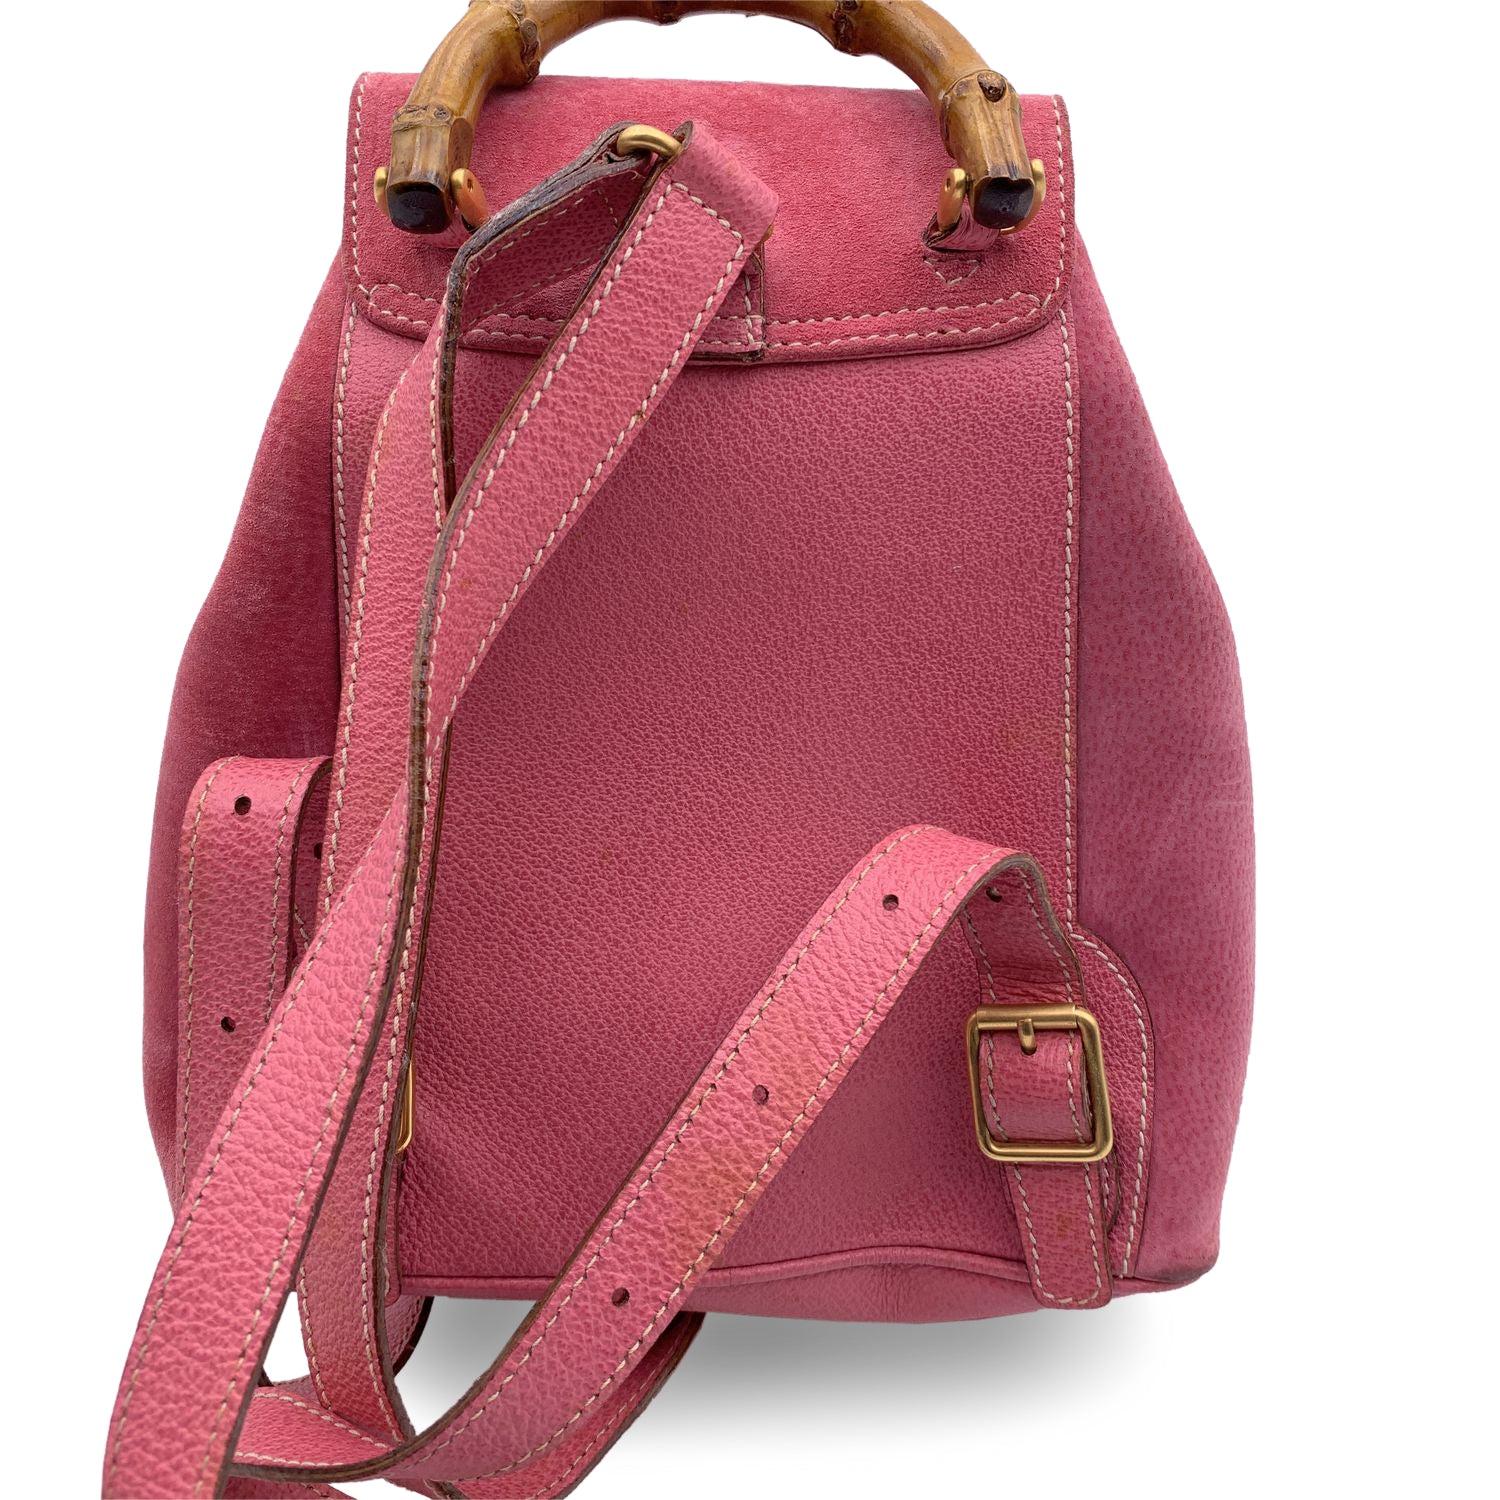 Vintage small backpack by Gucci, crafted in pink suede and leather. It features Bamboo handle and and knob. 1 front pocket with twist lock closure. Flap closure and drawstring top opening. Gold metal hardware. Internal diamond lining. 1 side zip